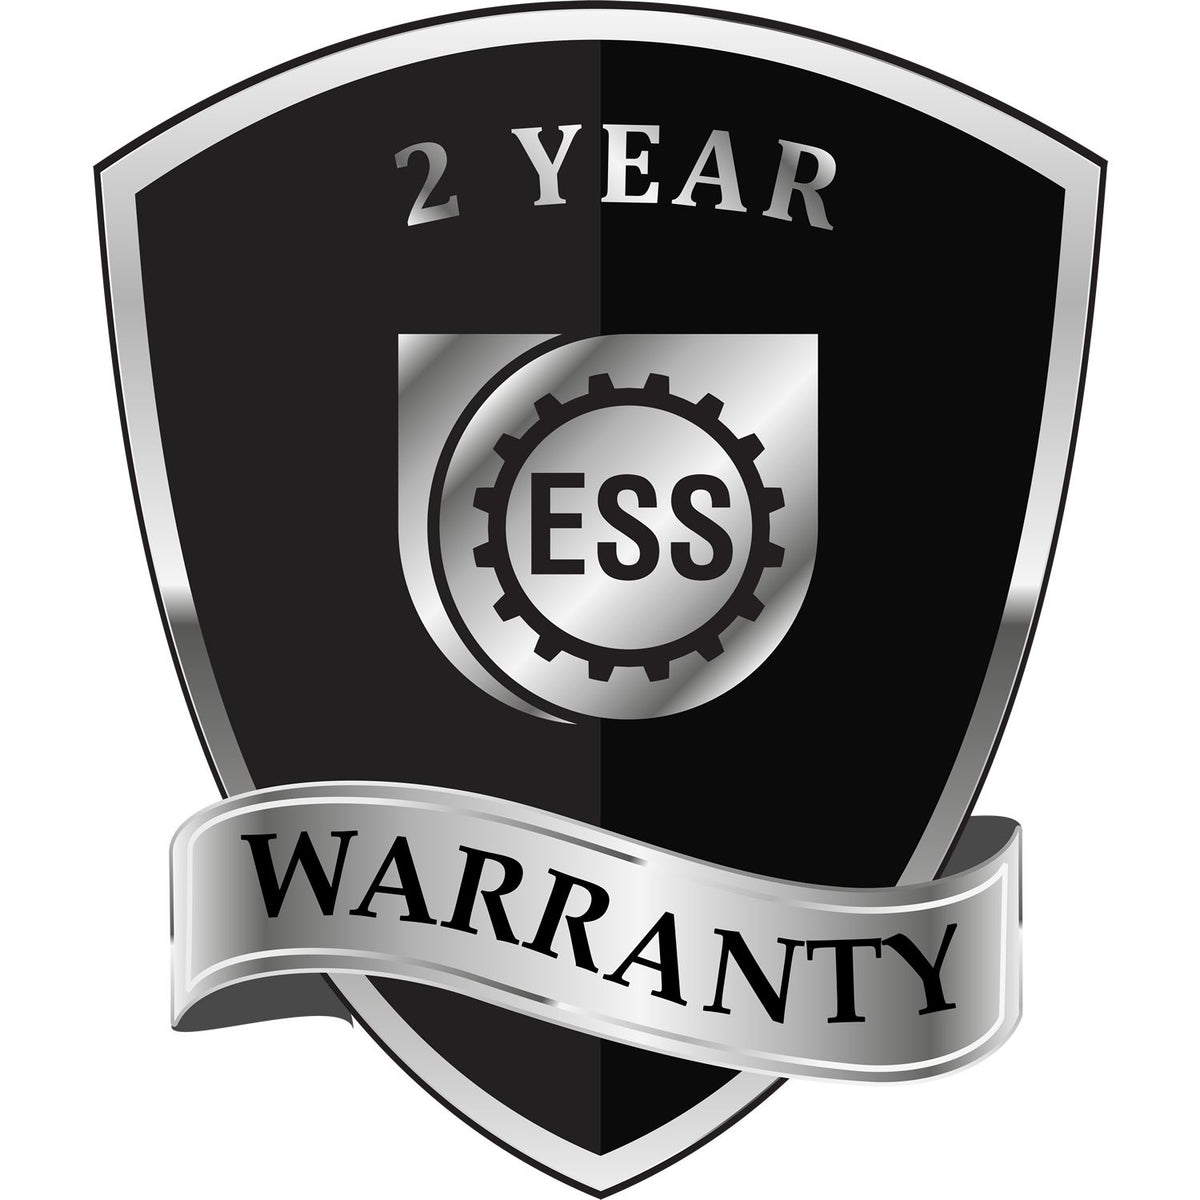 A badge or emblem showing a warranty icon for the Heavy Duty Cast Iron Idaho Engineer Seal Embosser